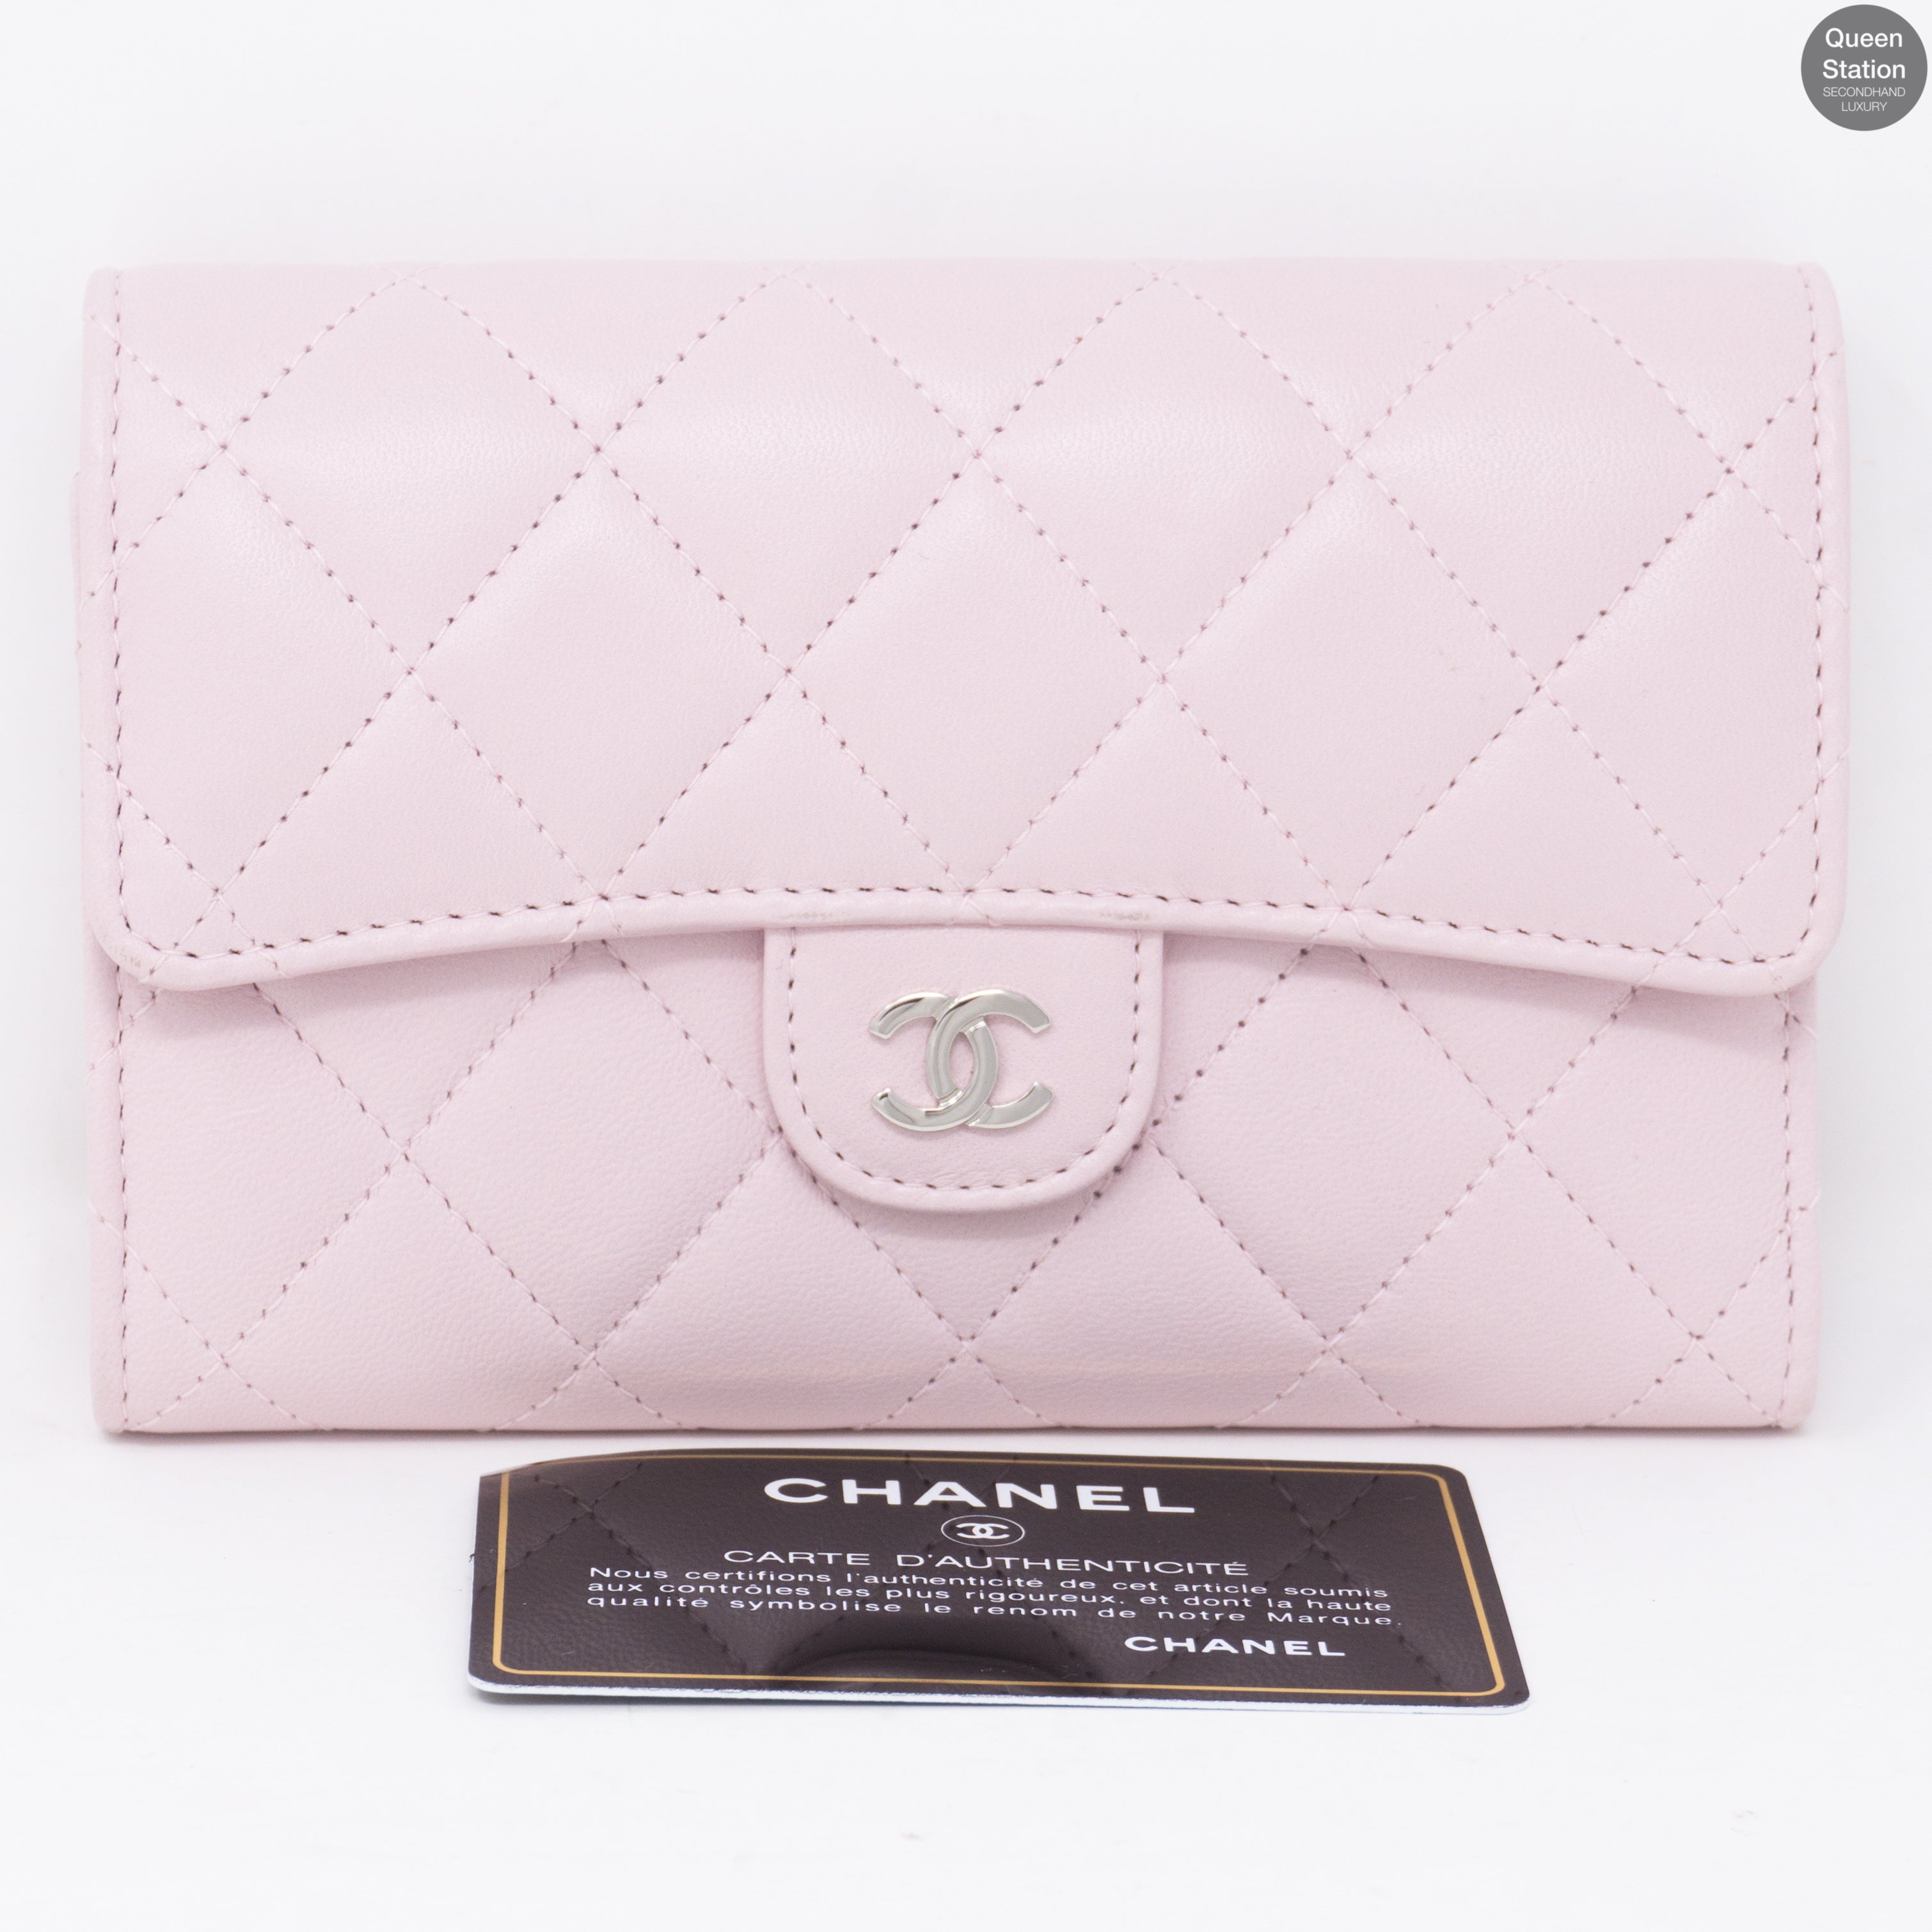 Chanel – Classic Flap Wallet Light Pink Leather – Queen Station